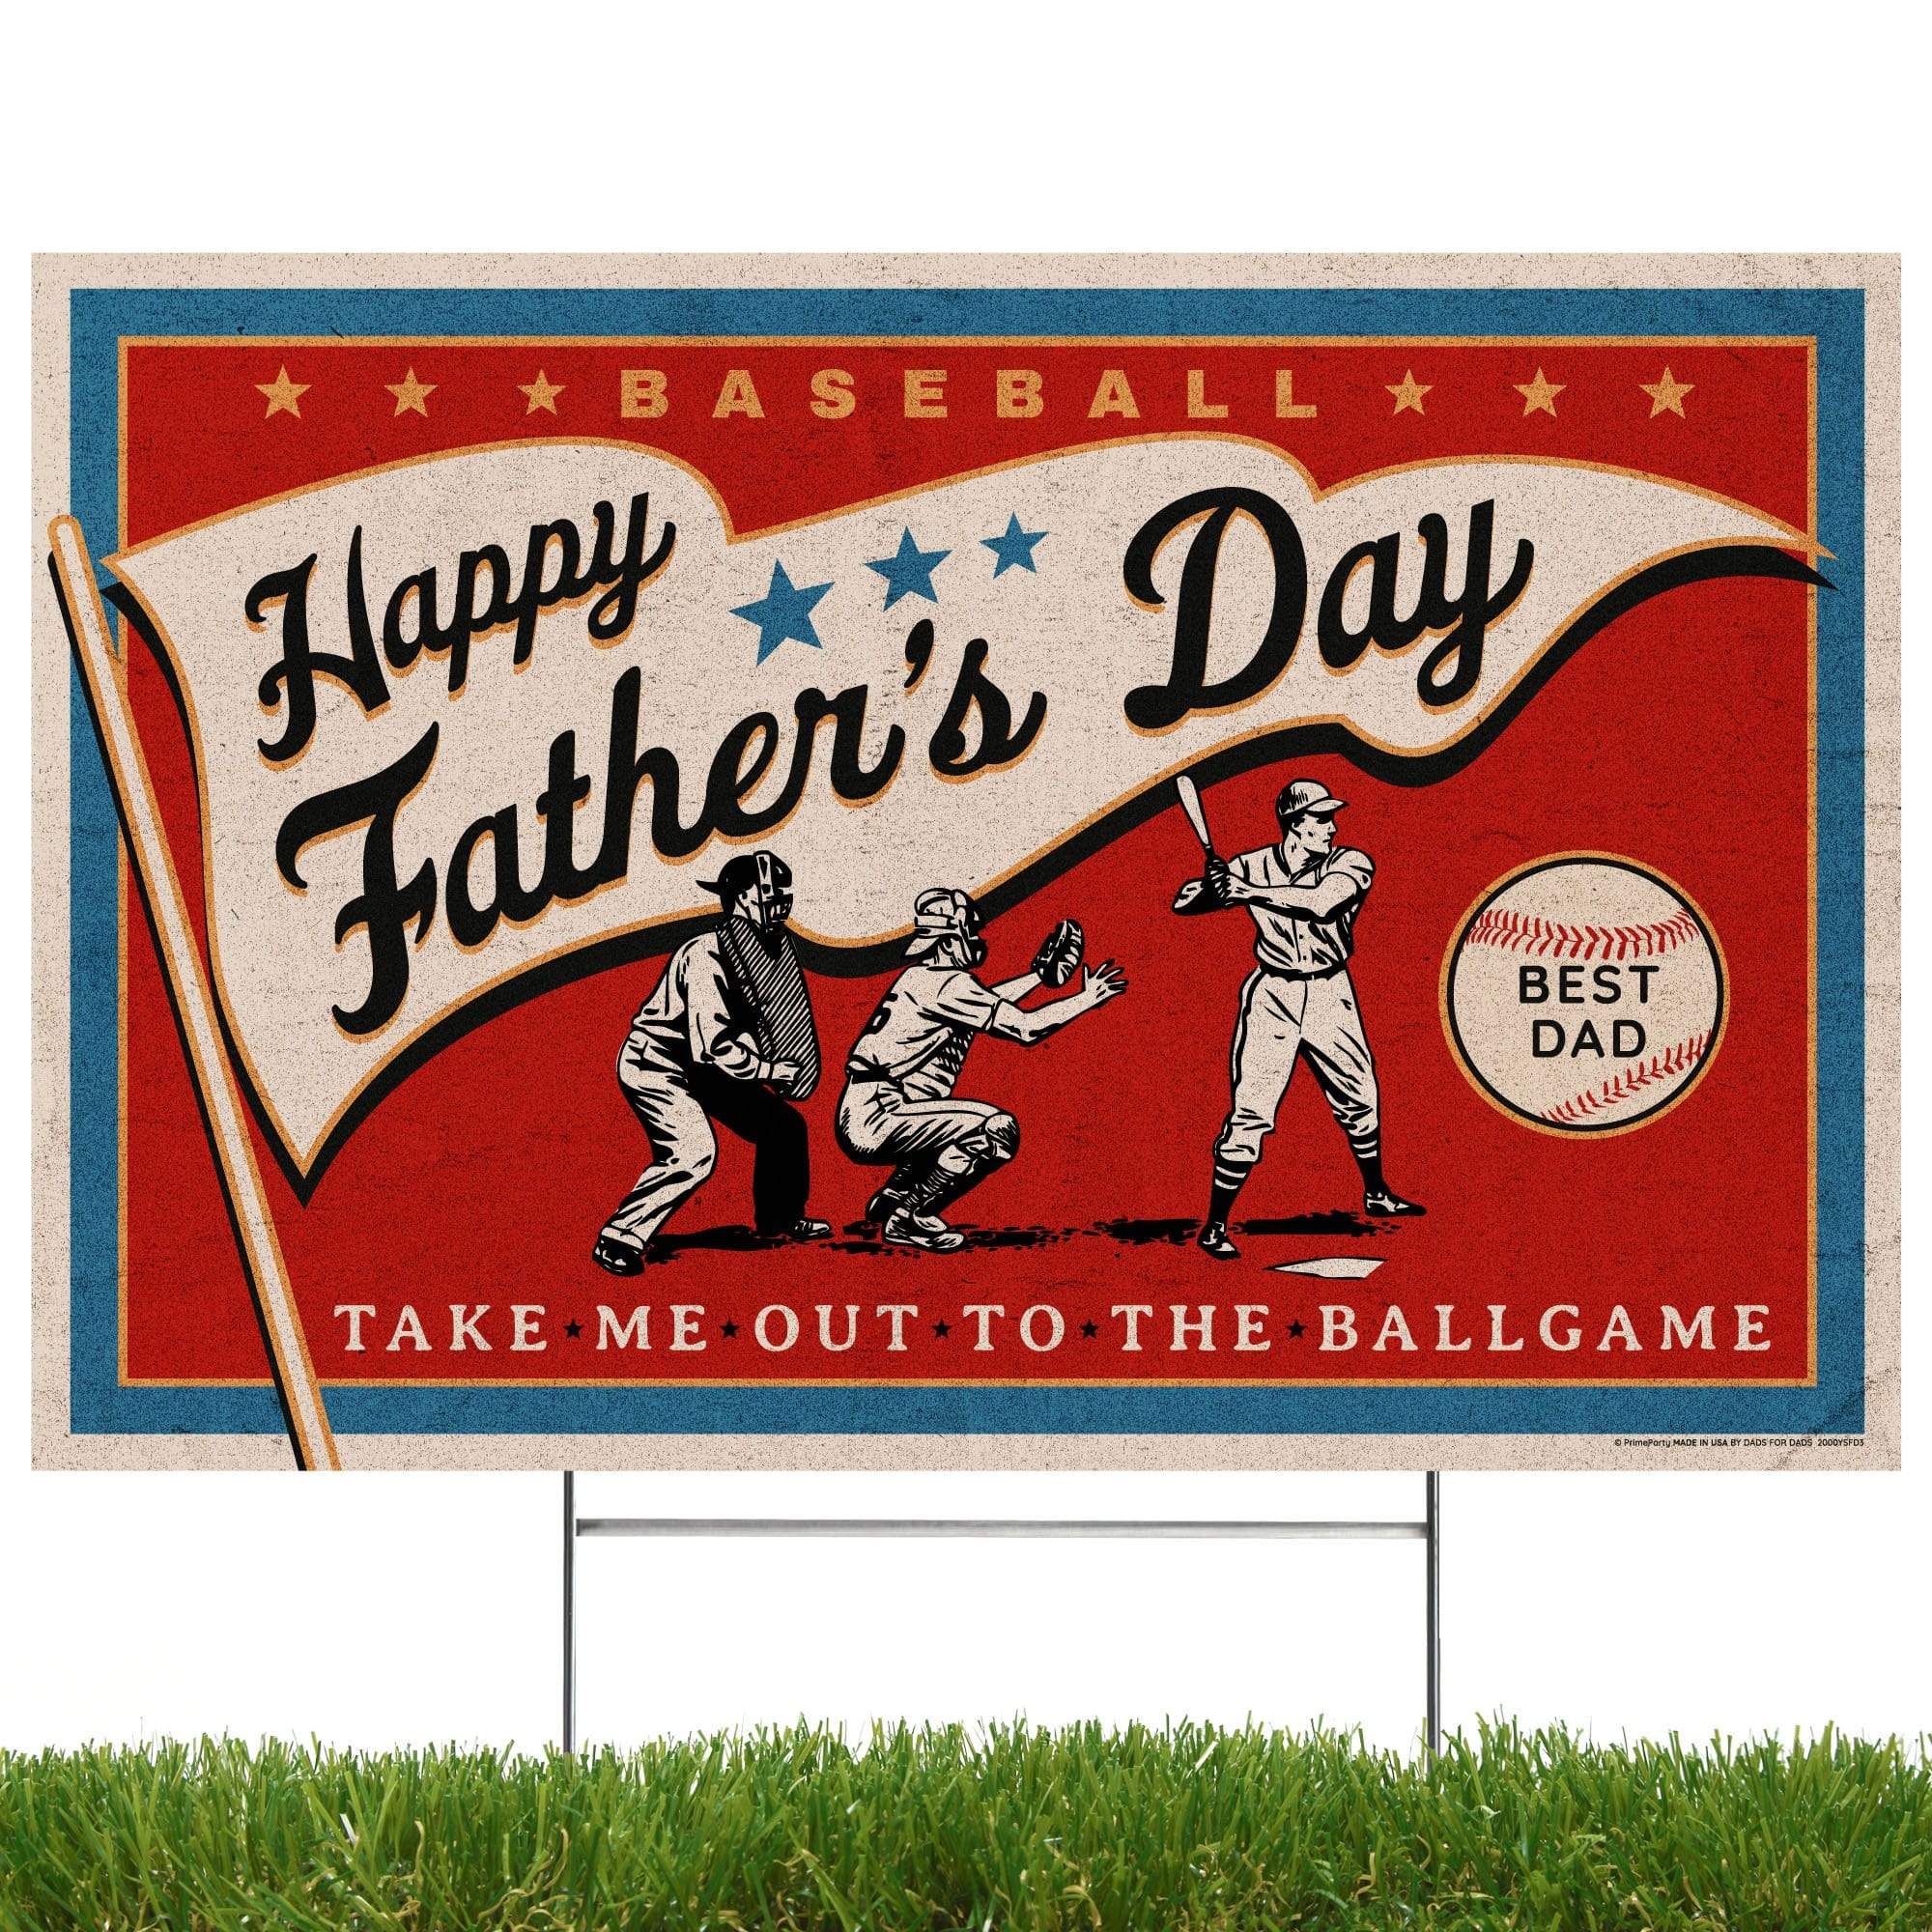 Take dad out to the ballgame for Father's Day!